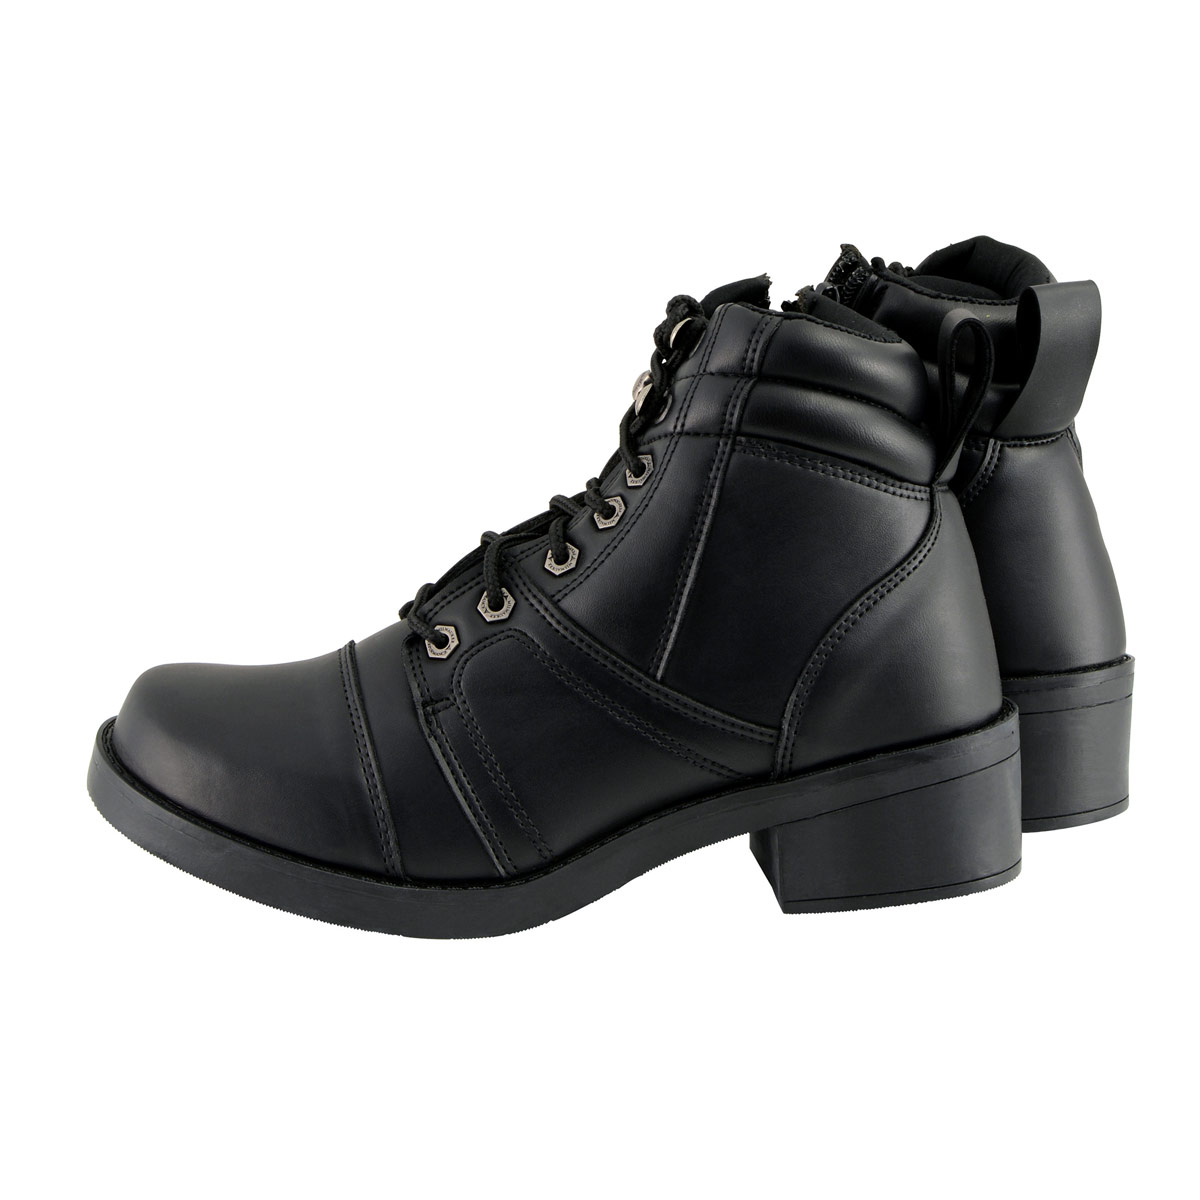 Milwaukee Leather MBK9255 Boys Black Lace-Up Boots with Side Zipper Entry 6 - image 5 of 9